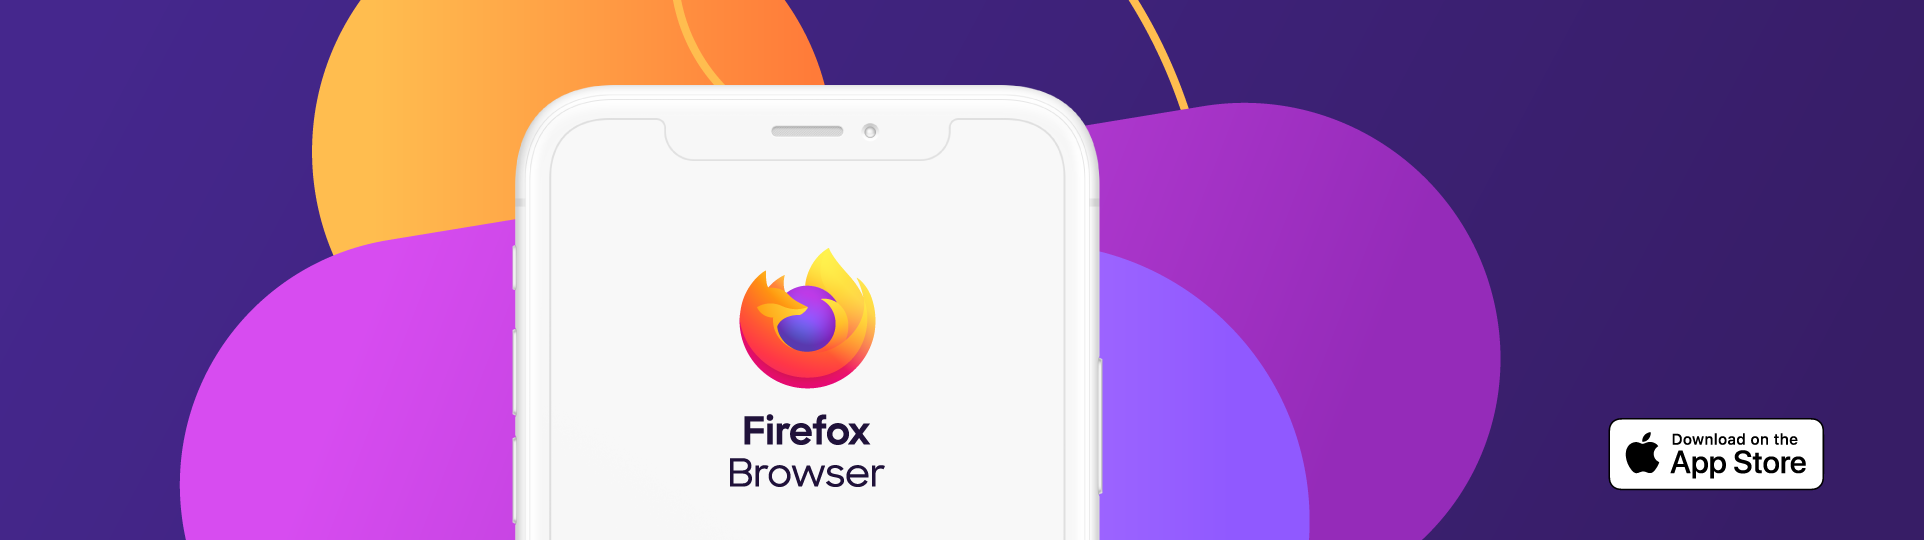 Get Firefox for iOS devices